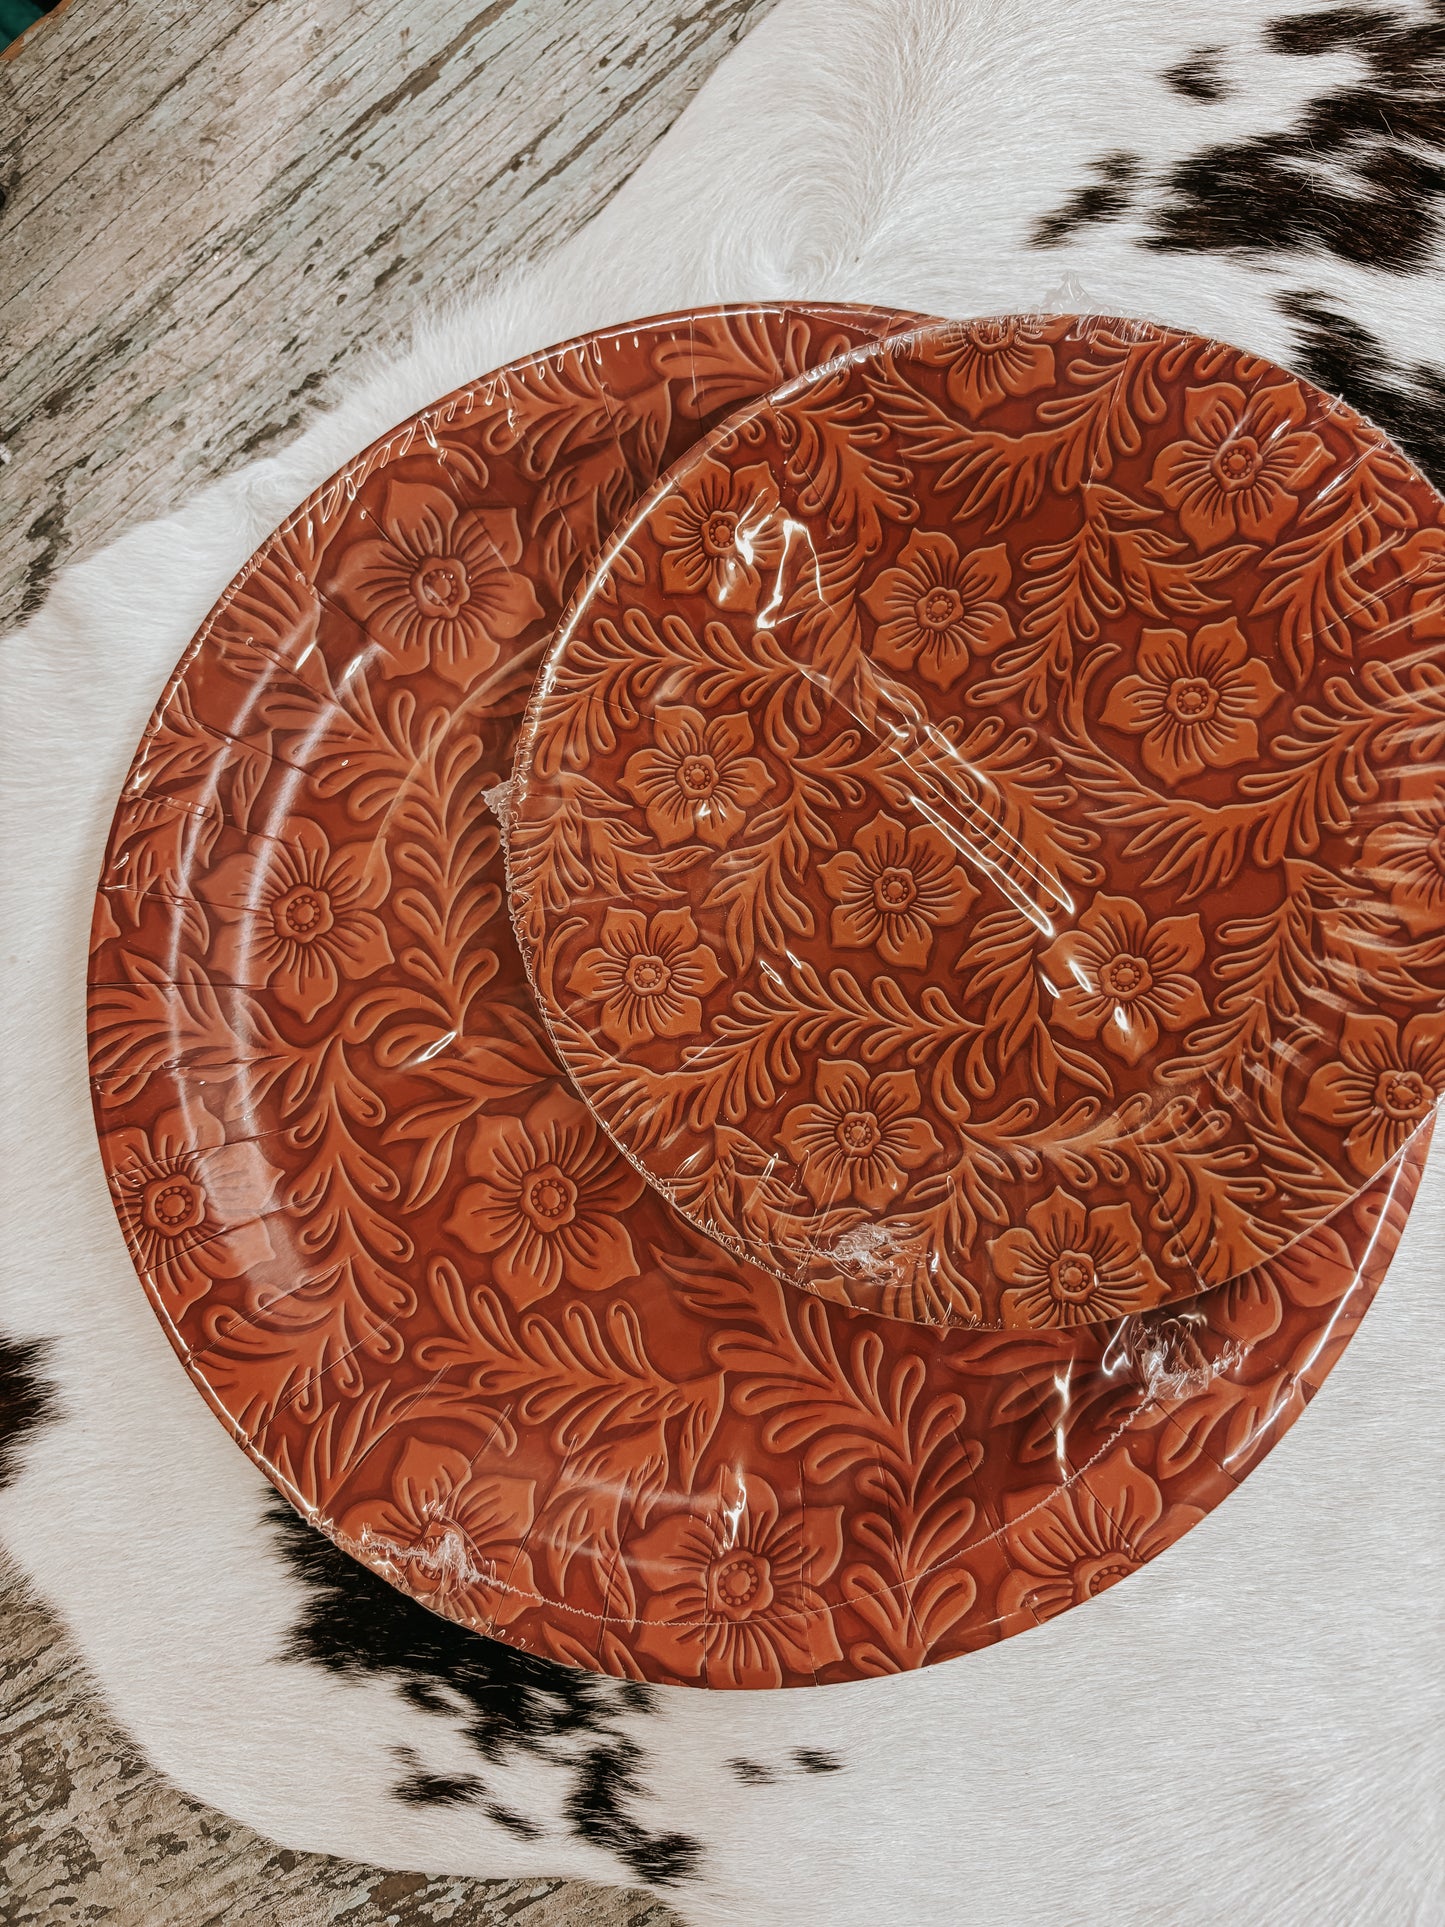 The Floral Tooled Leather Dinner Plate (Set of 8)